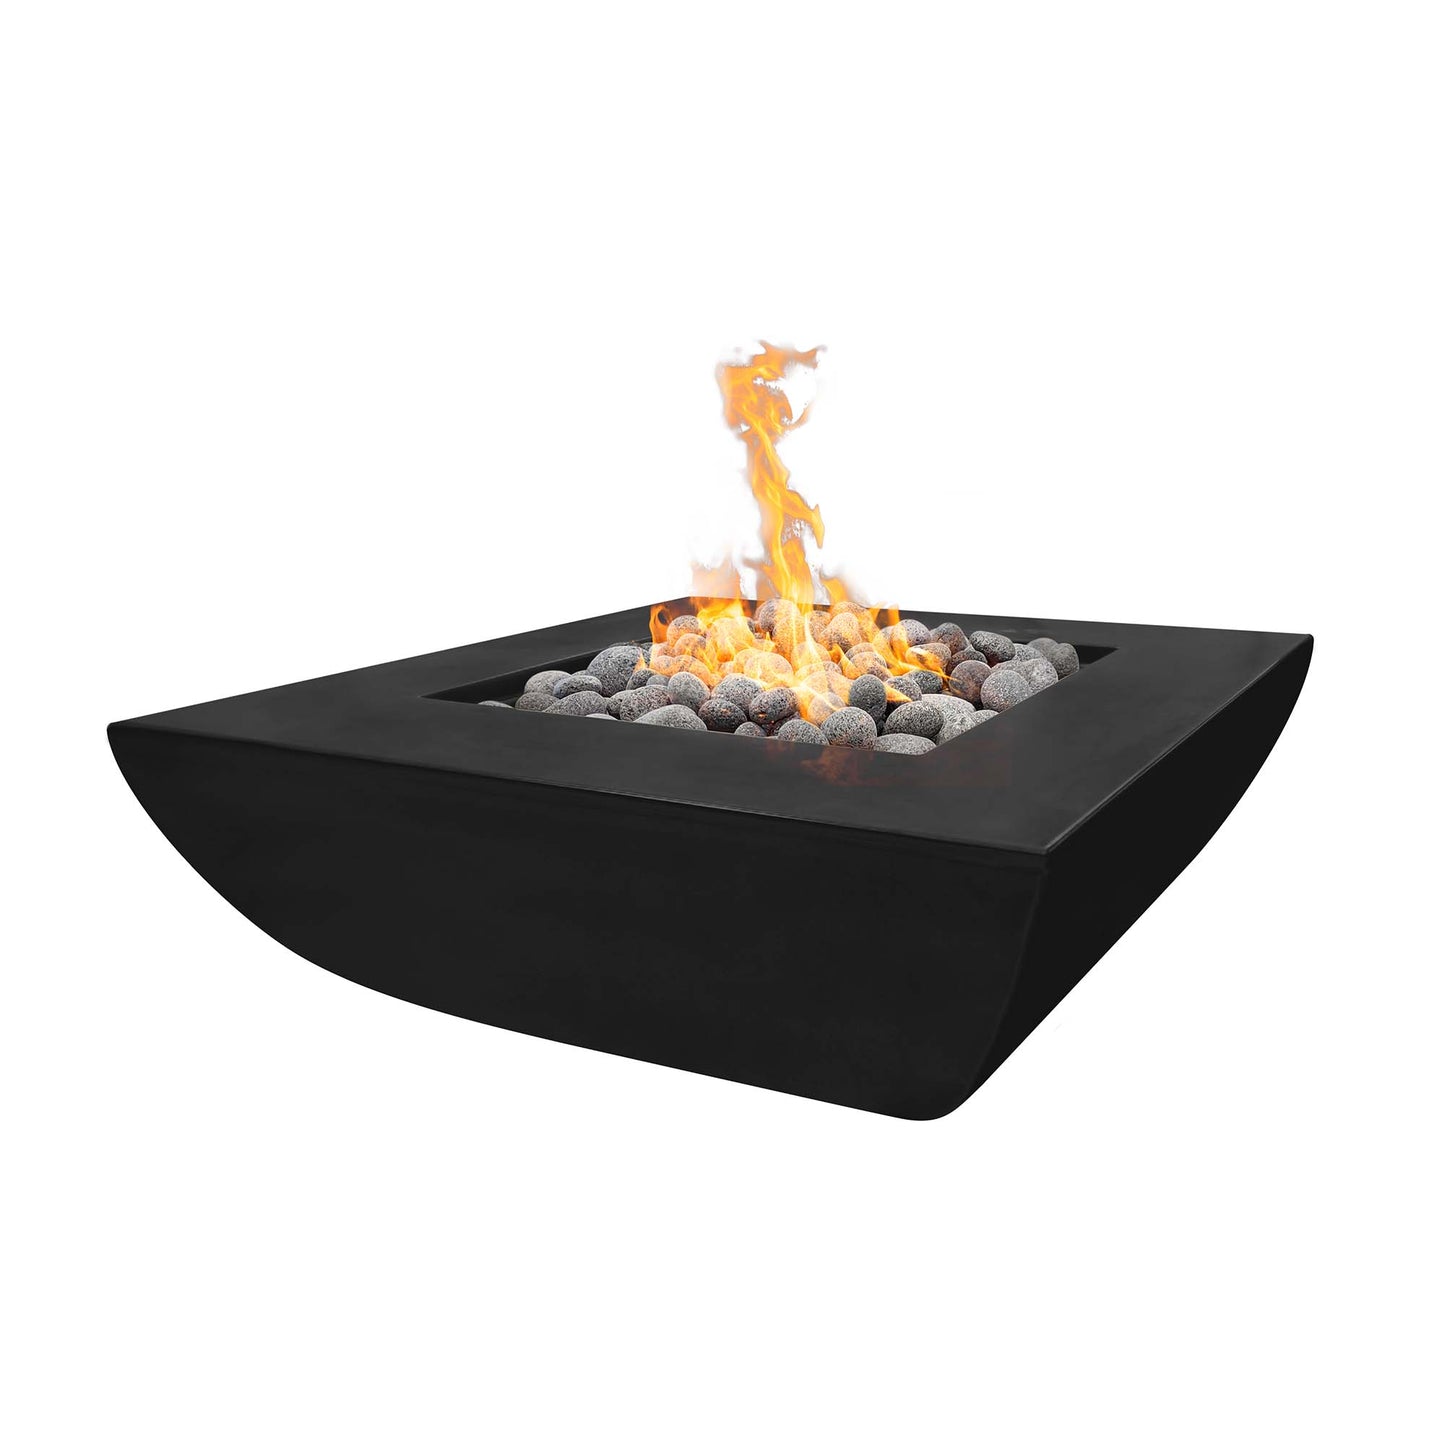 The Outdoor Plus Square Avalon 42" Ash GFRC Concrete Natural Gas Fire Pit with Match Lit with Flame Sense Ignition